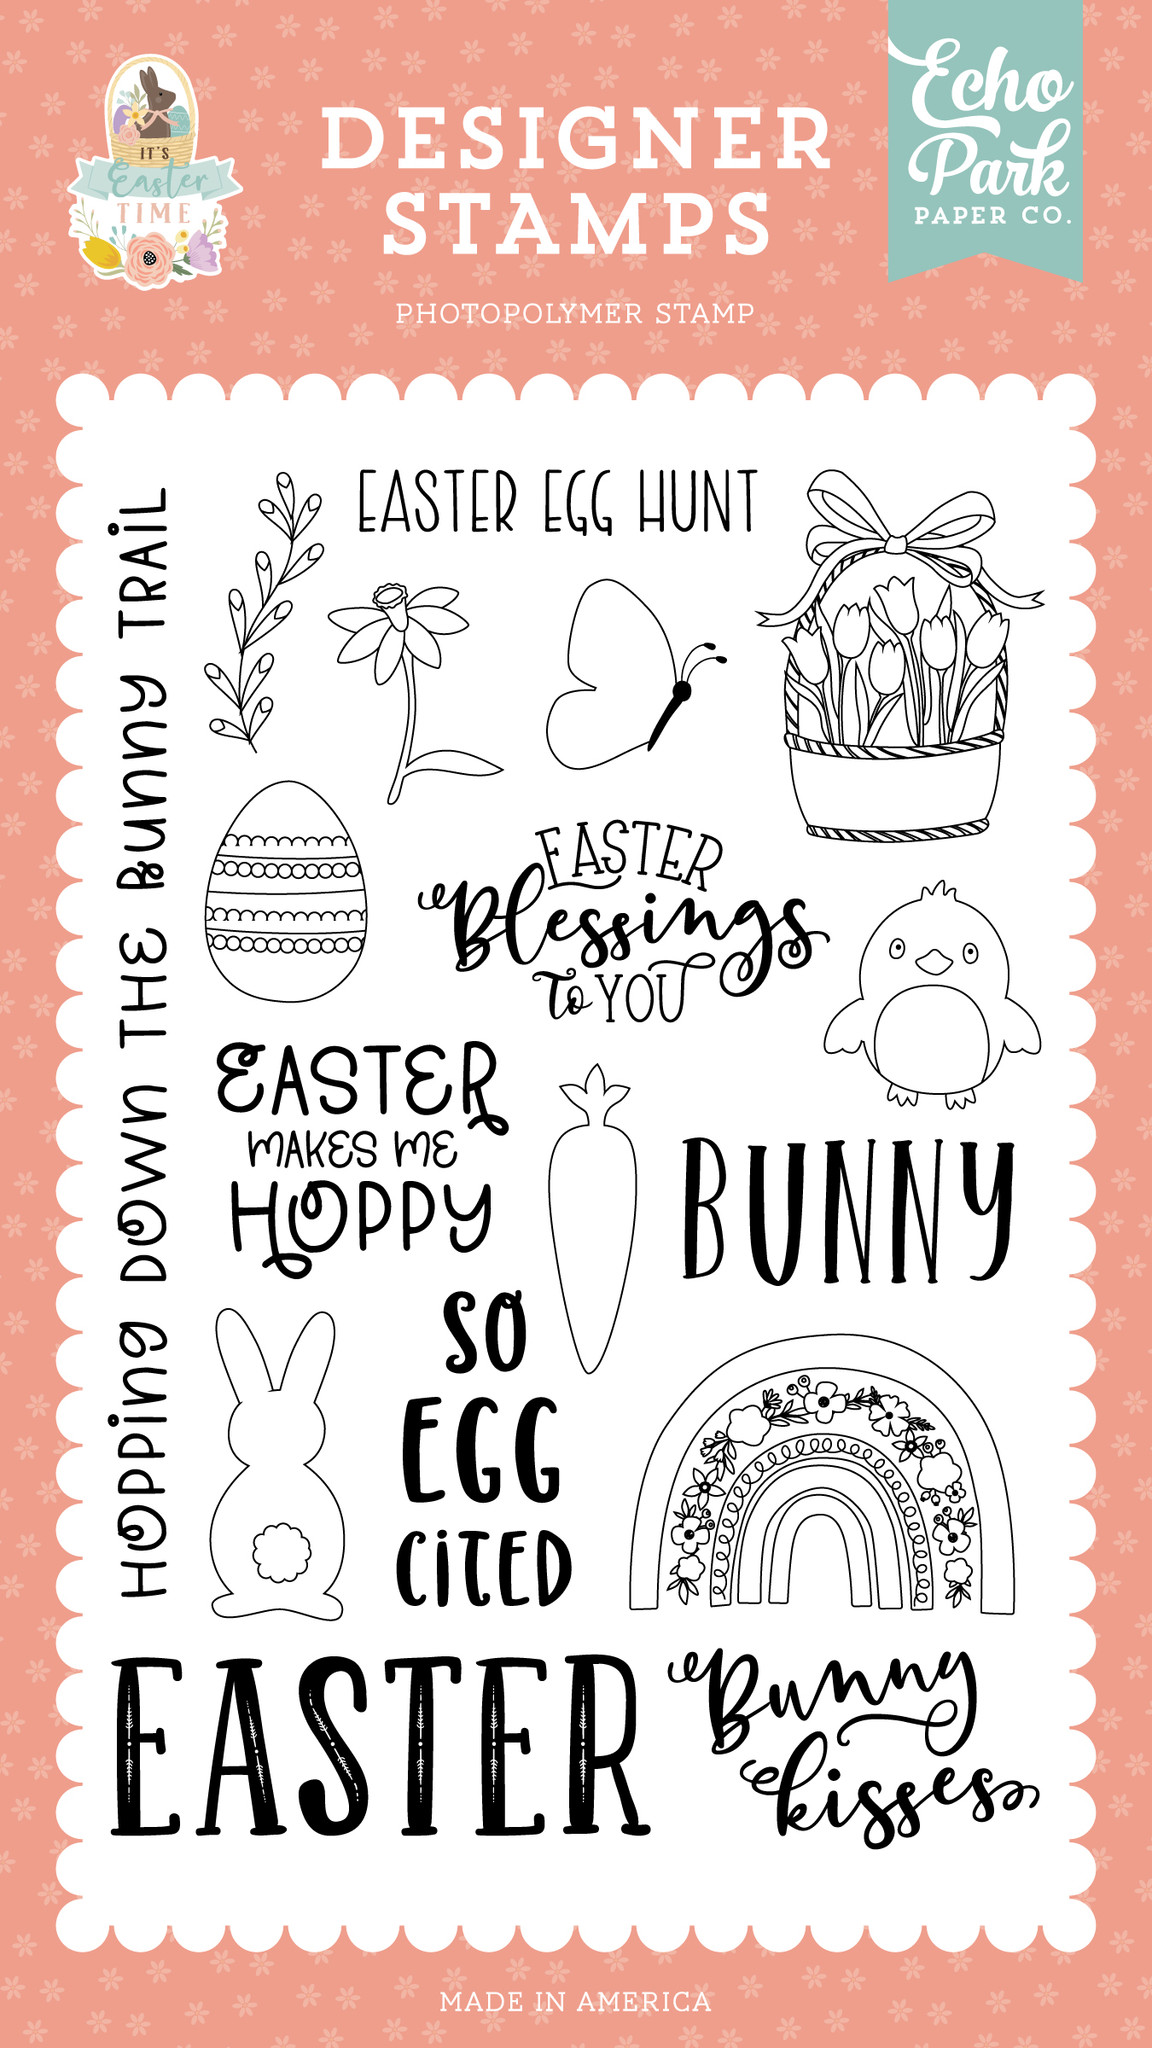 It's Easter Time: So Egg Cited Stamp Set - Echo Park Paper Co.